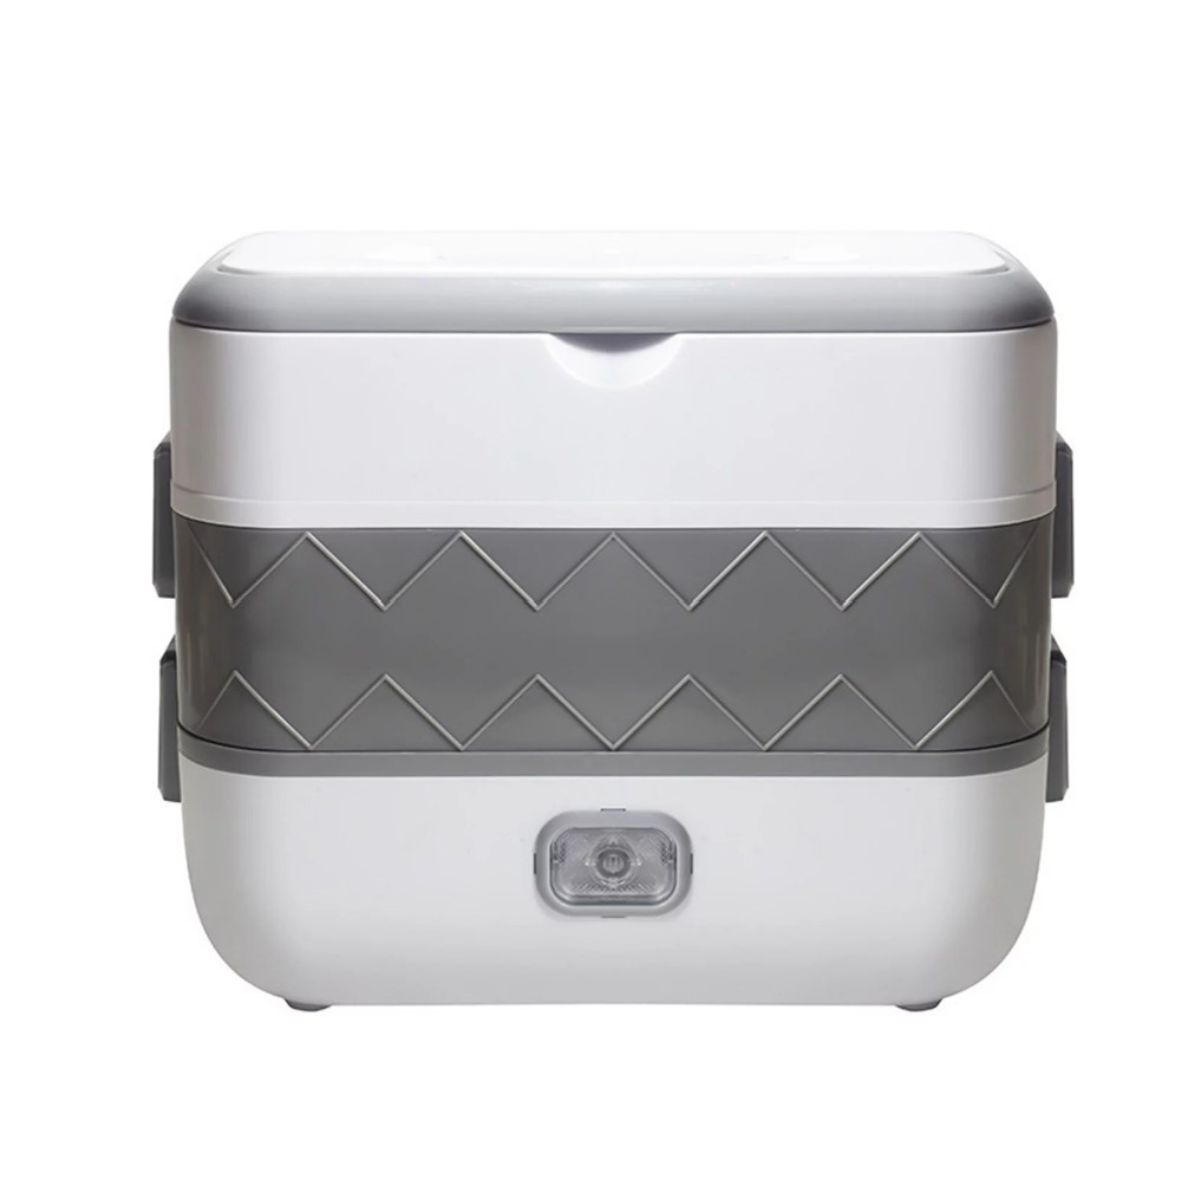 Double decker electric lunch box. White and grey.